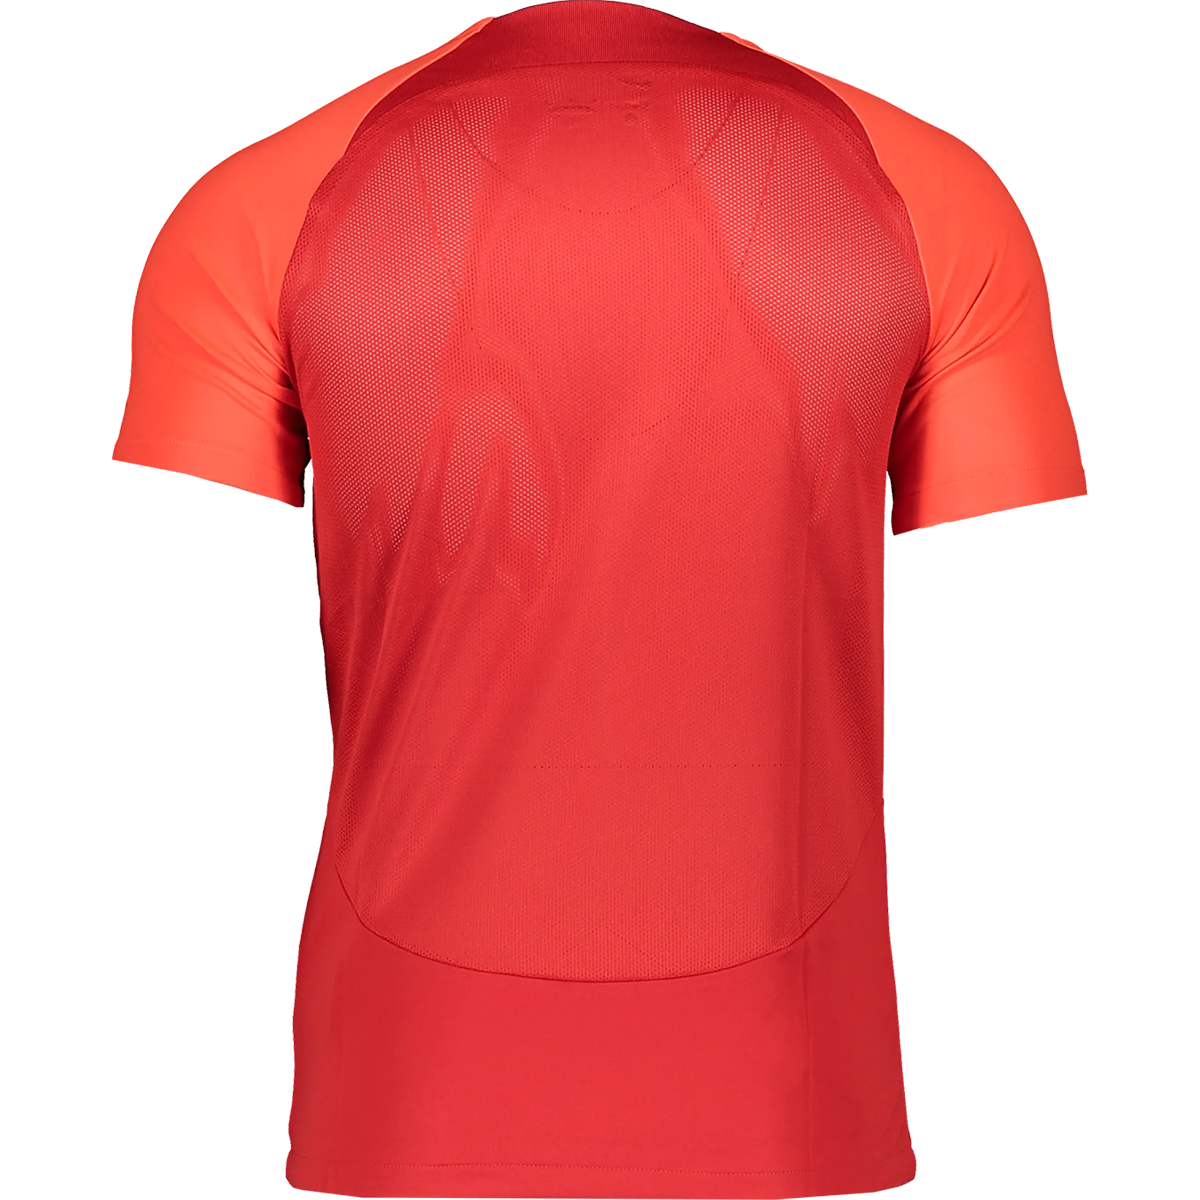 Maillot Academy Pro